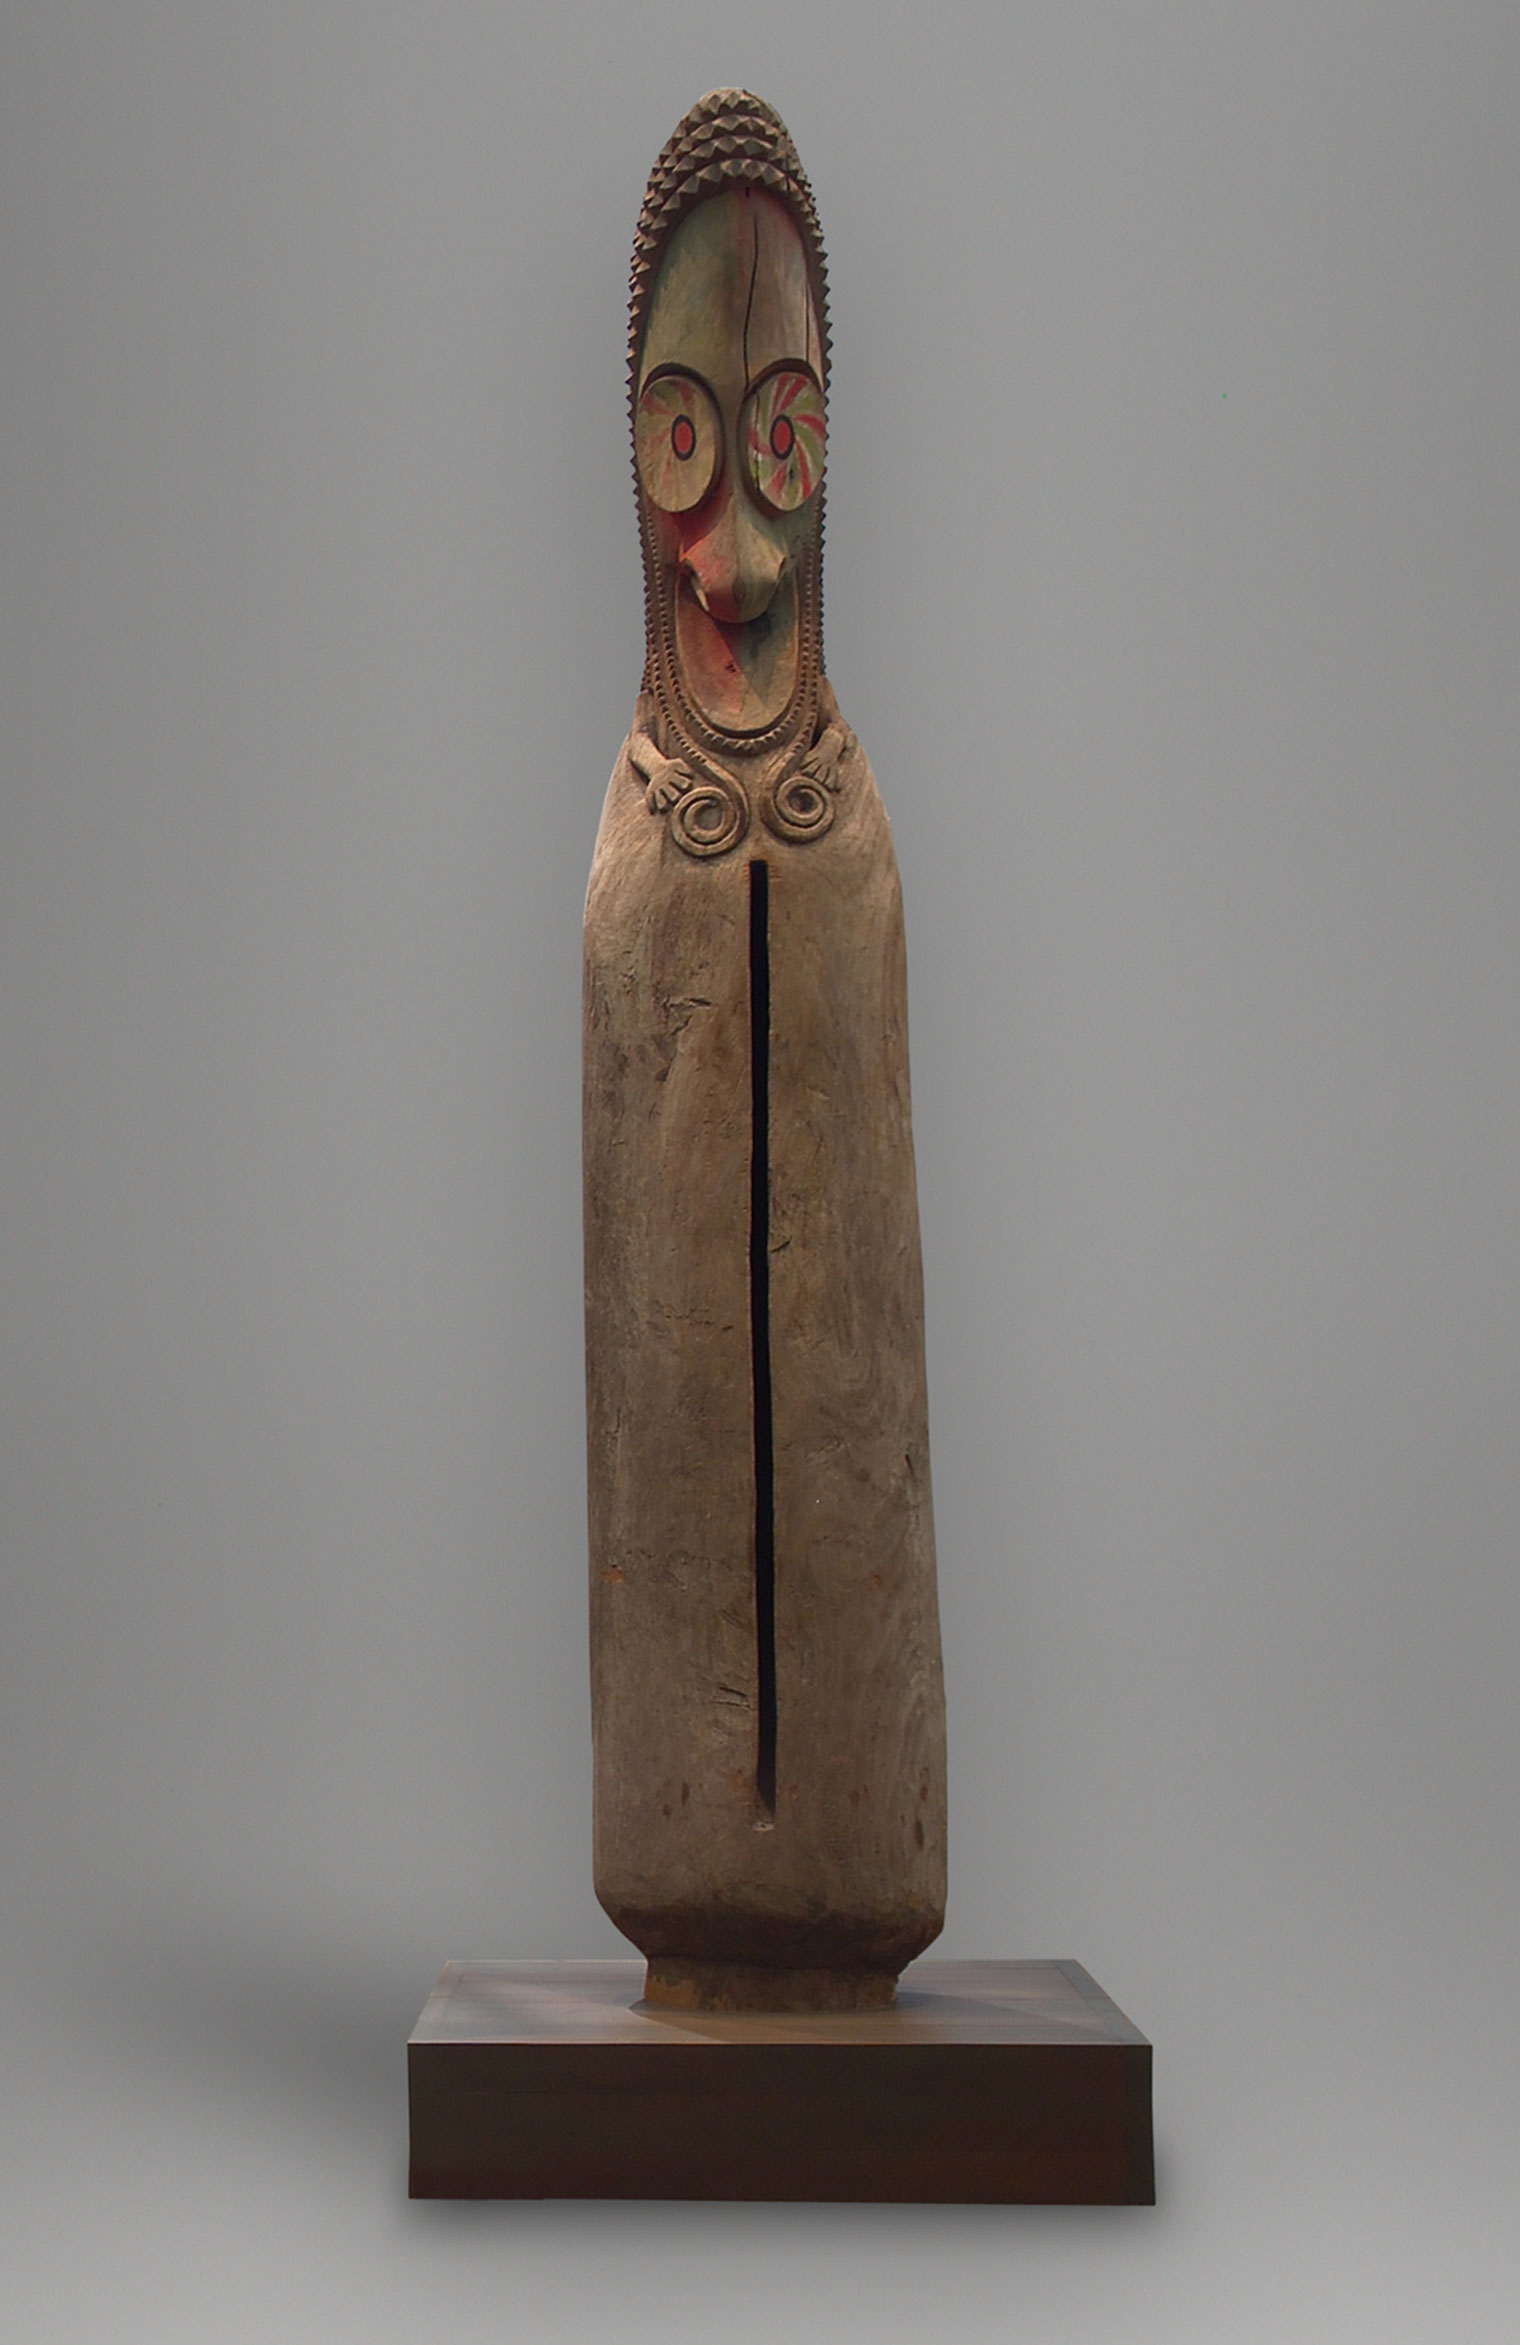 A hollow, wooden Oceanic sculpture with a bird-like face, large round eyes, sharp down-turned beak, and pointed head